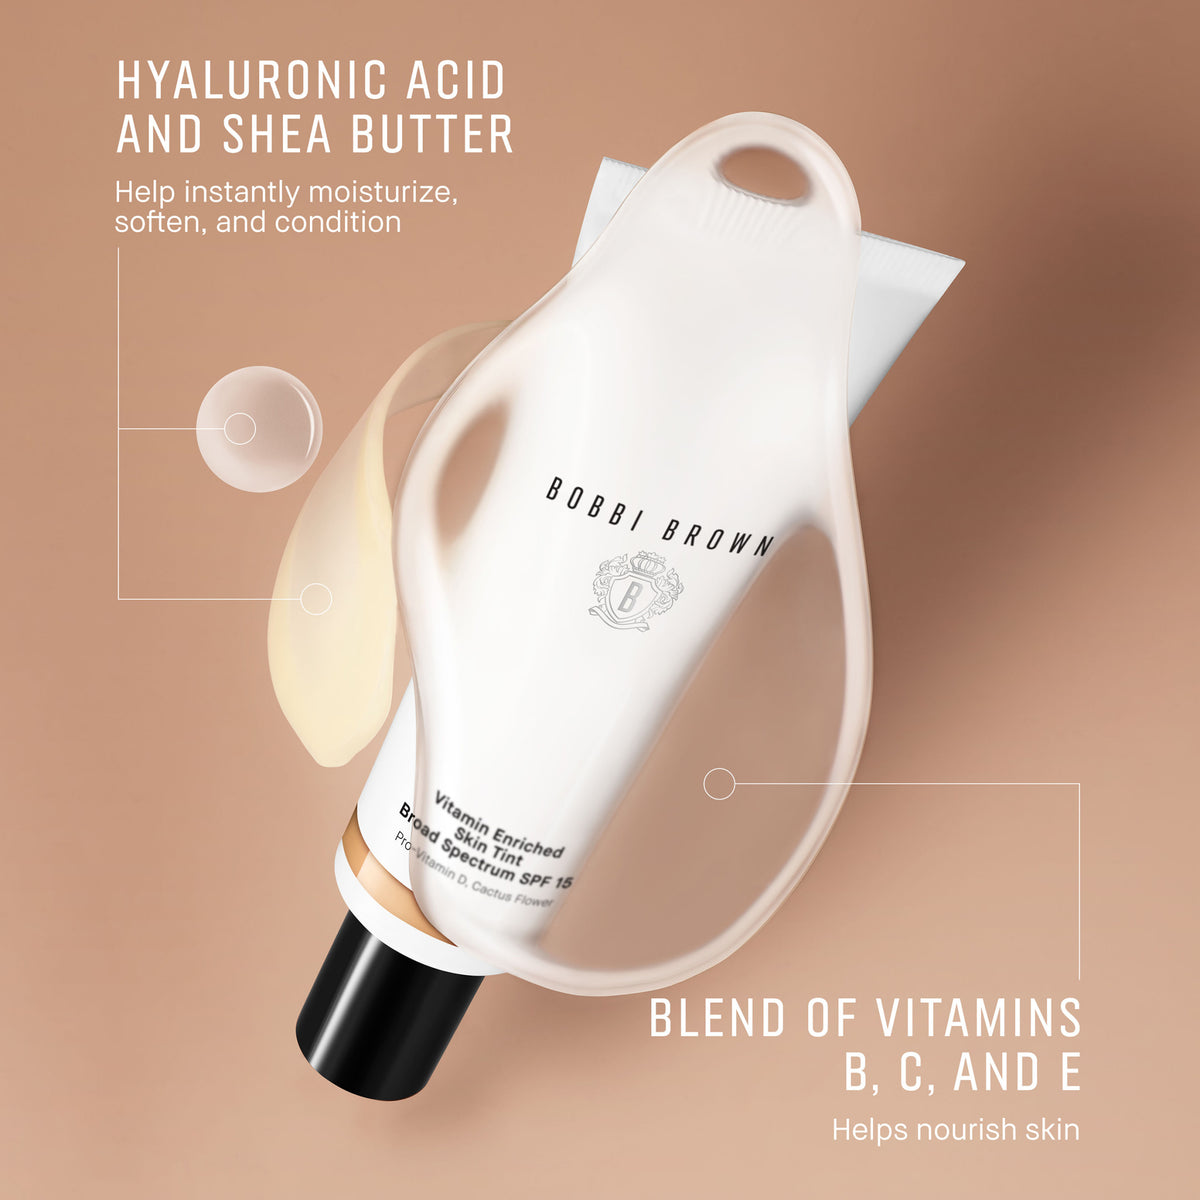 Bobbi Brown Vitamin Enriched Hydrating Skin Tint SPF 15 with Hyaluronic Acid .